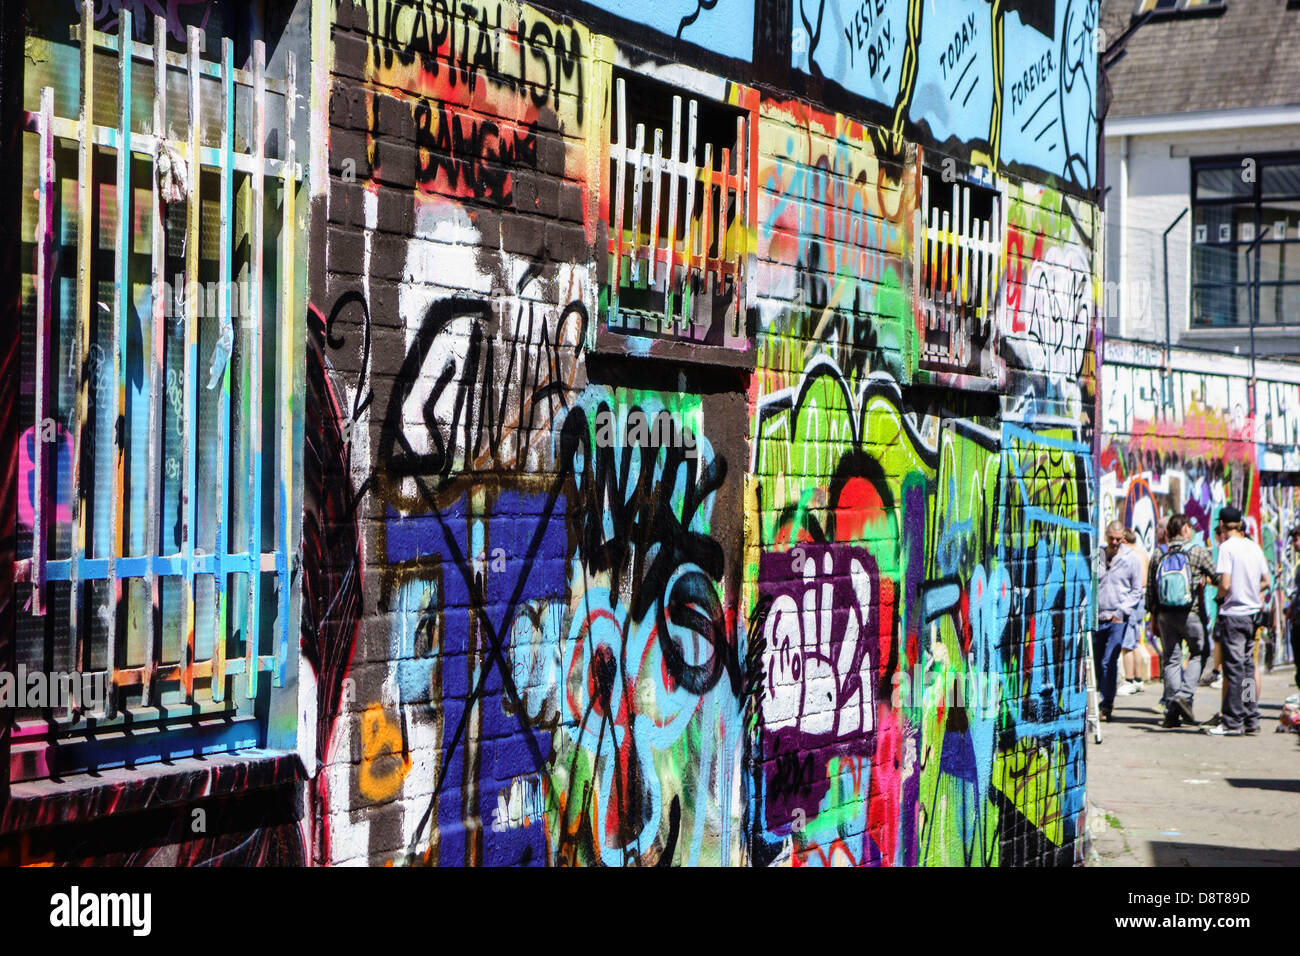 Youngsters in alley spraying colourful graffiti on wall of building in city Stock Photo